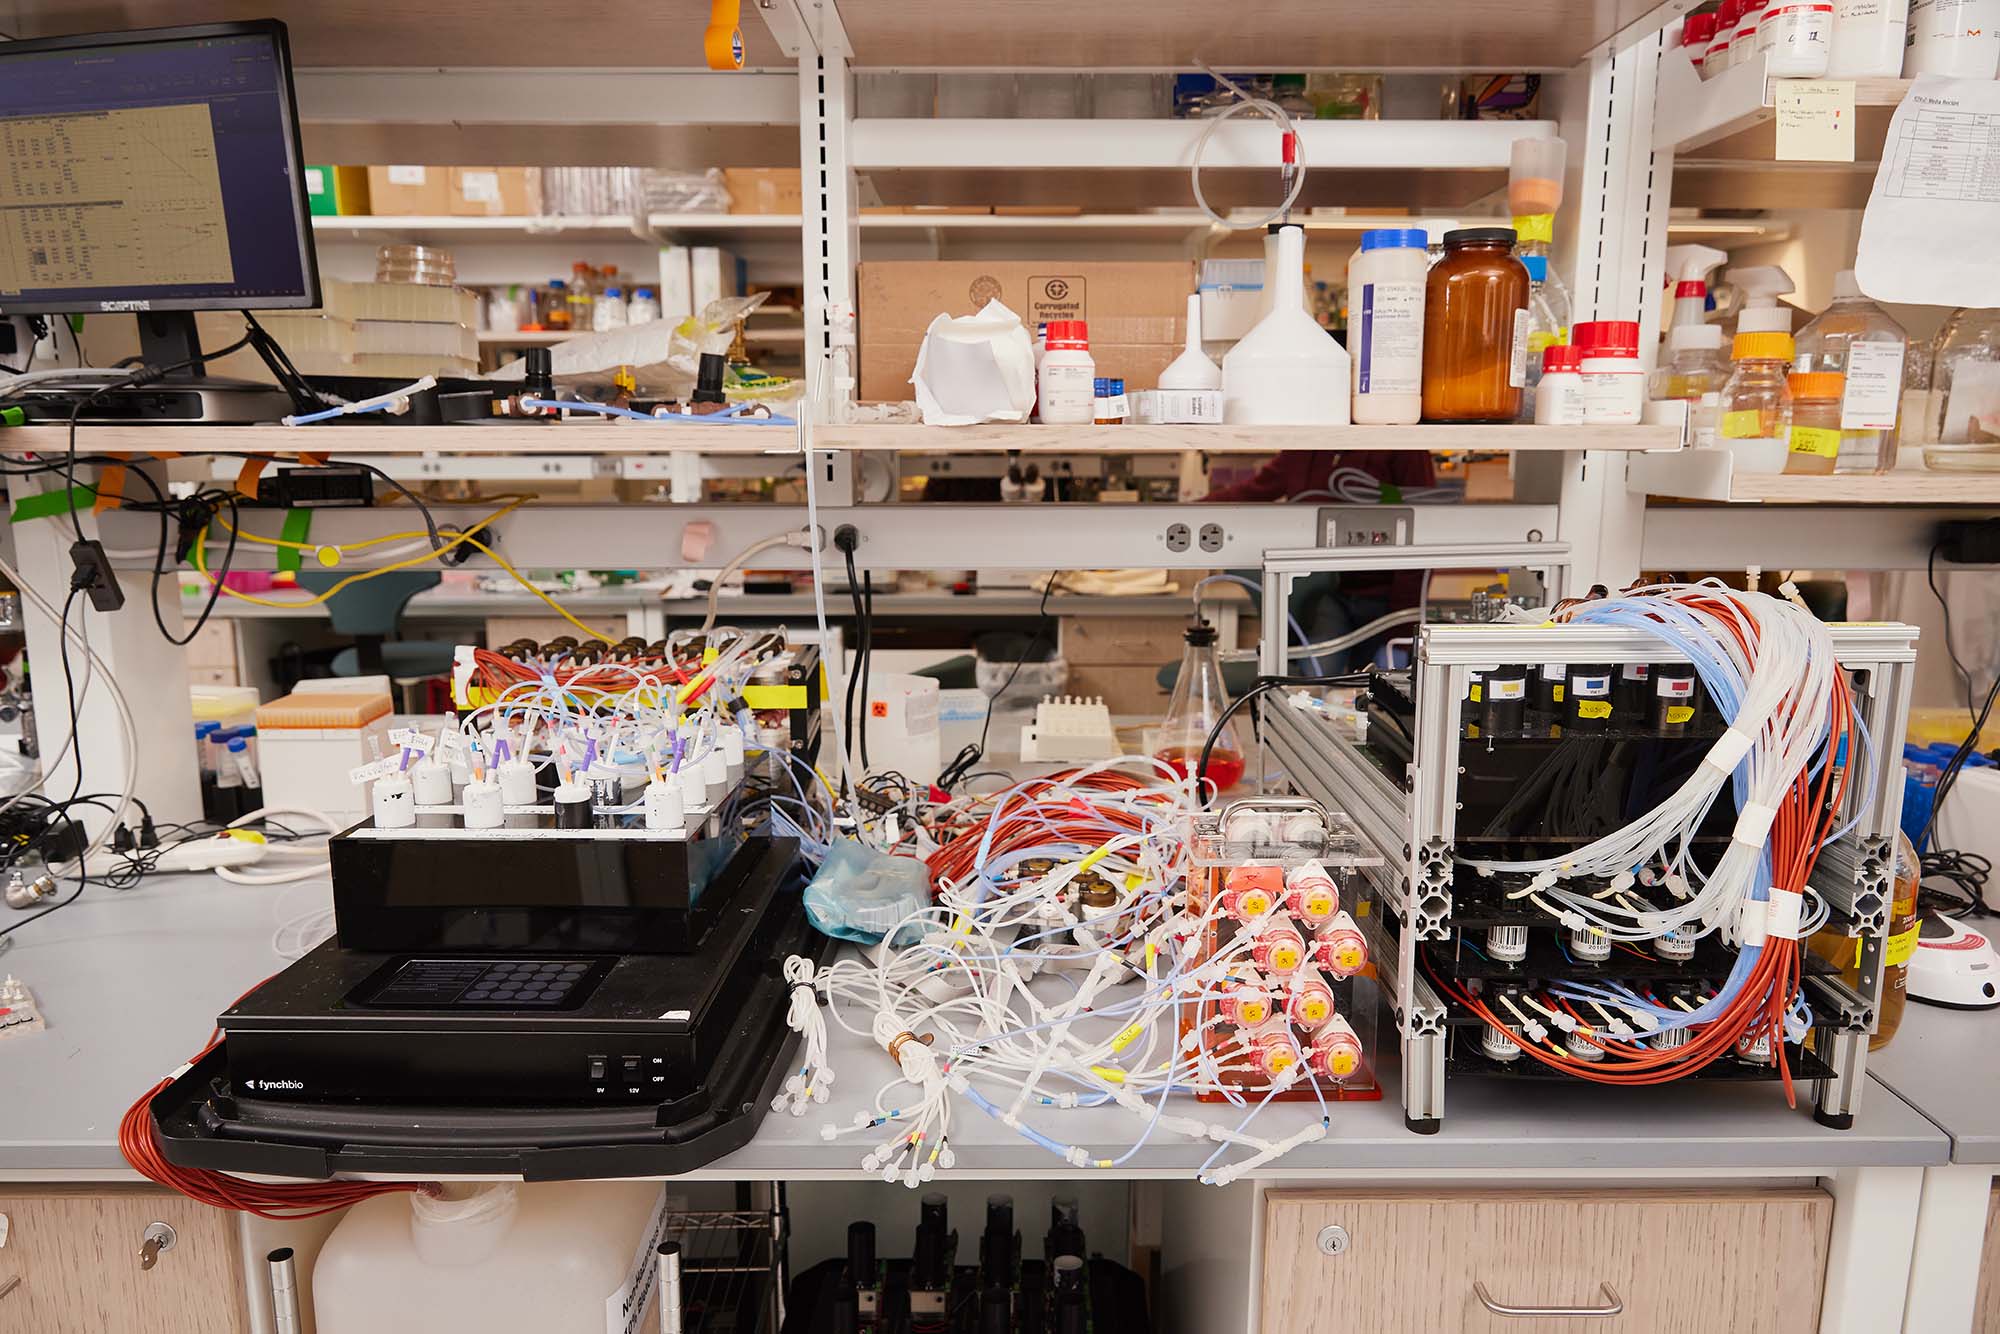 Photo: Wide view of the electronics lab featuring machinery, wires, and test tubes to be used in the machine.